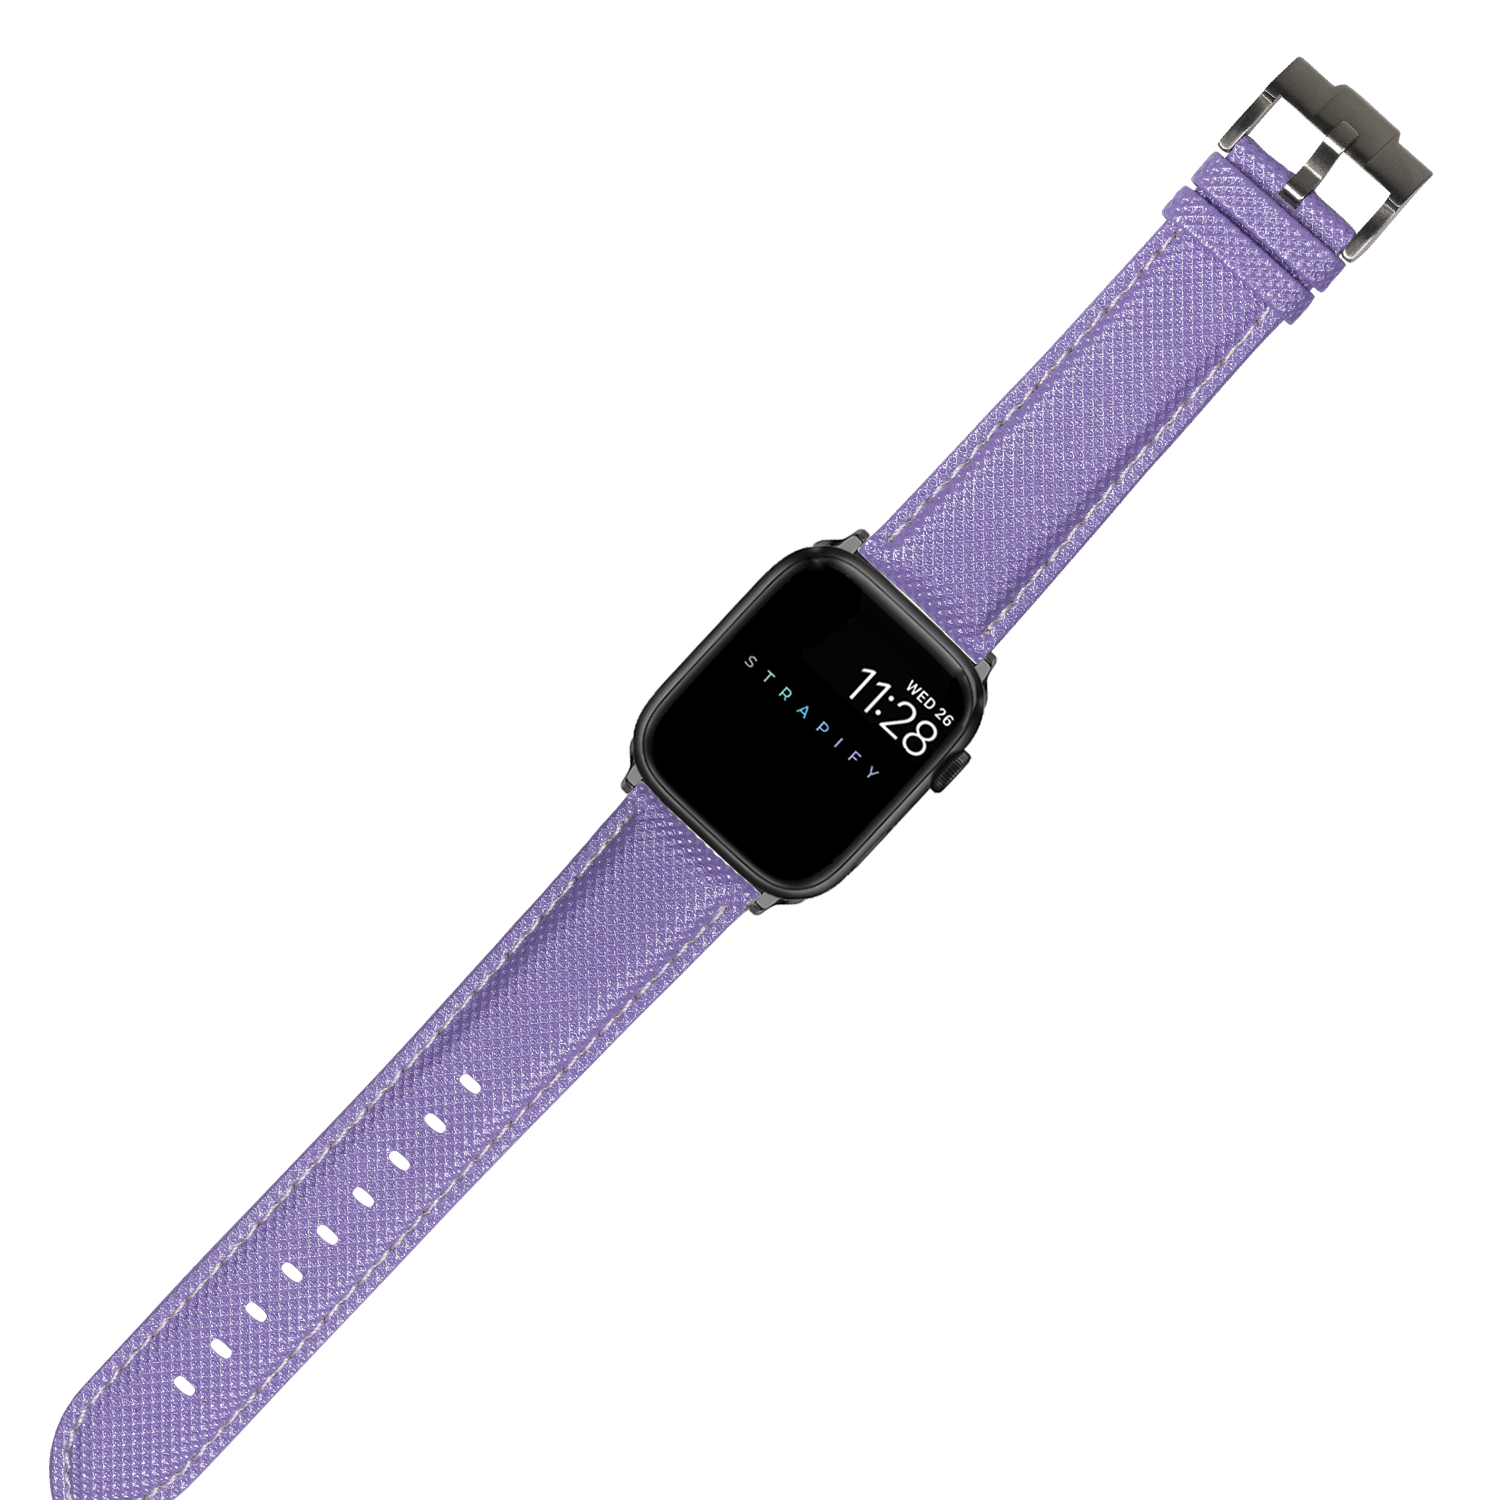 [Apple Watch] Sailcloth - Lavender with White Stitching